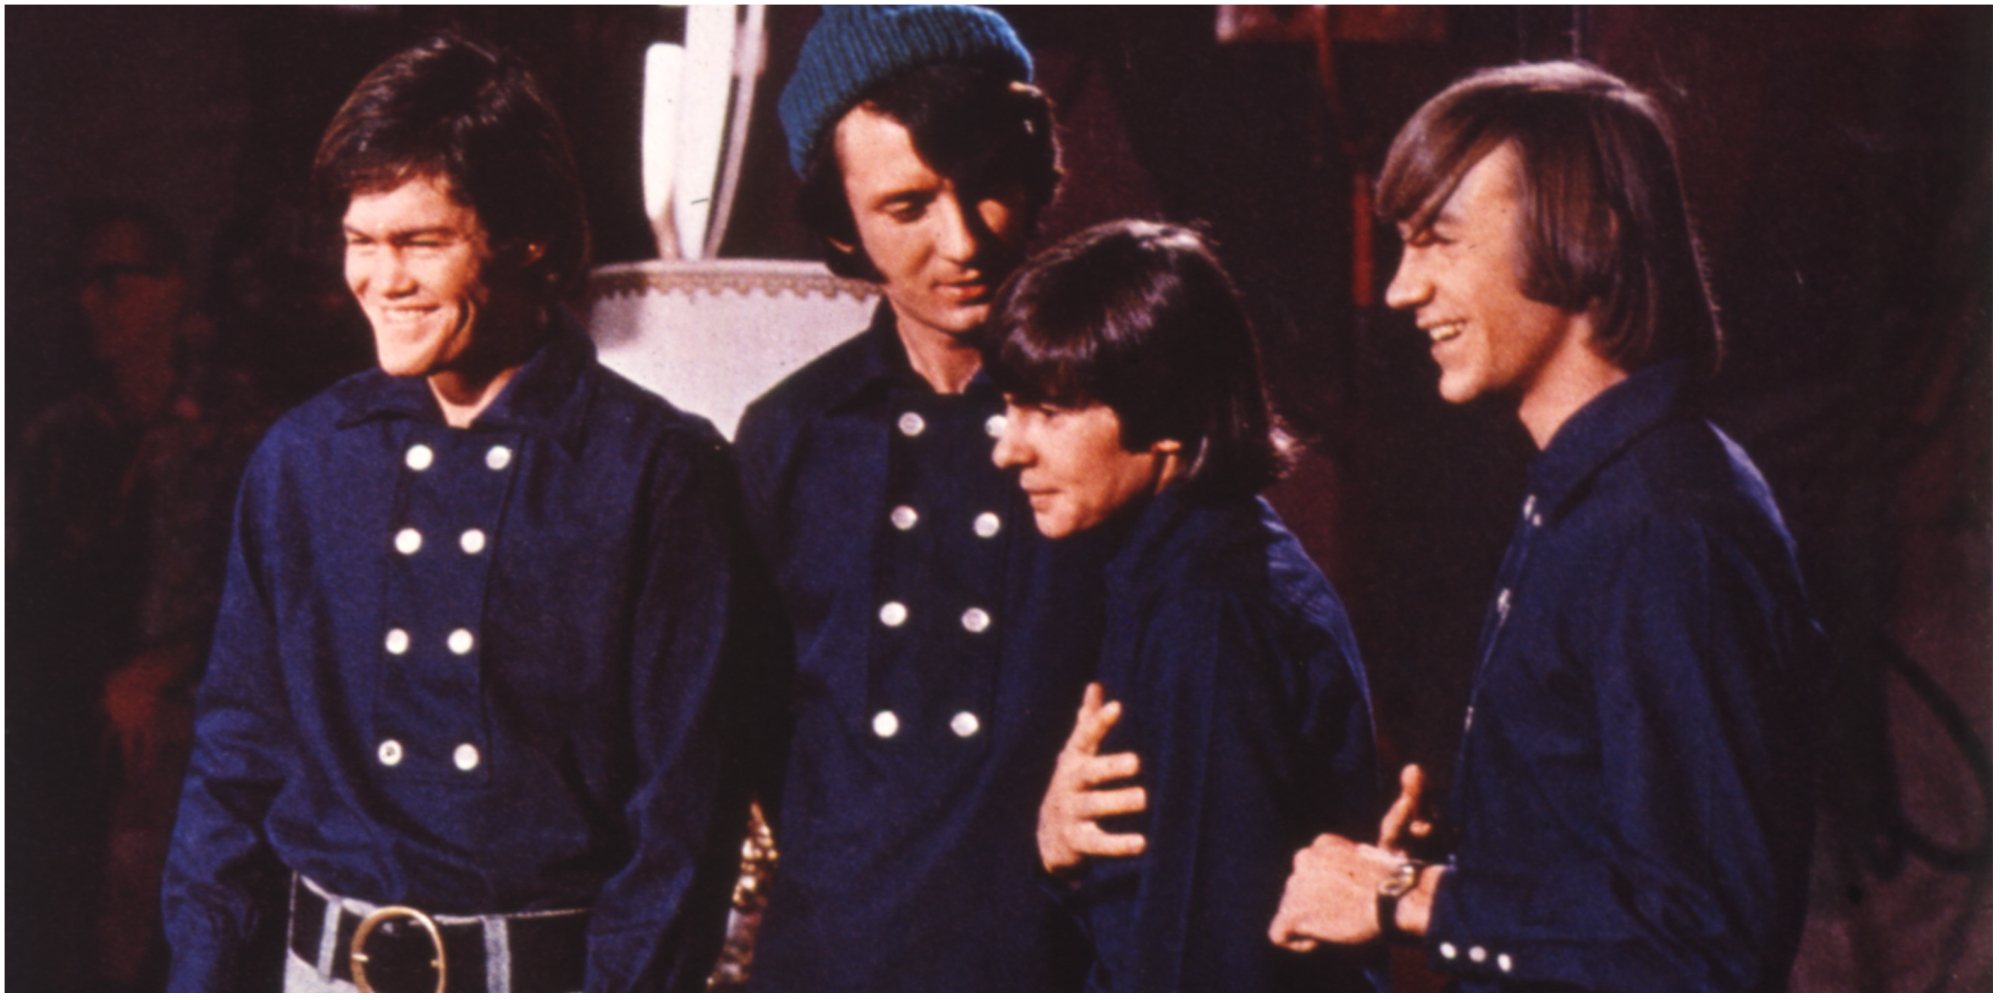 The Monkees cast includes Davy Jones, Mike Nesmith, Mickey Dolenz, and Peter Tork.